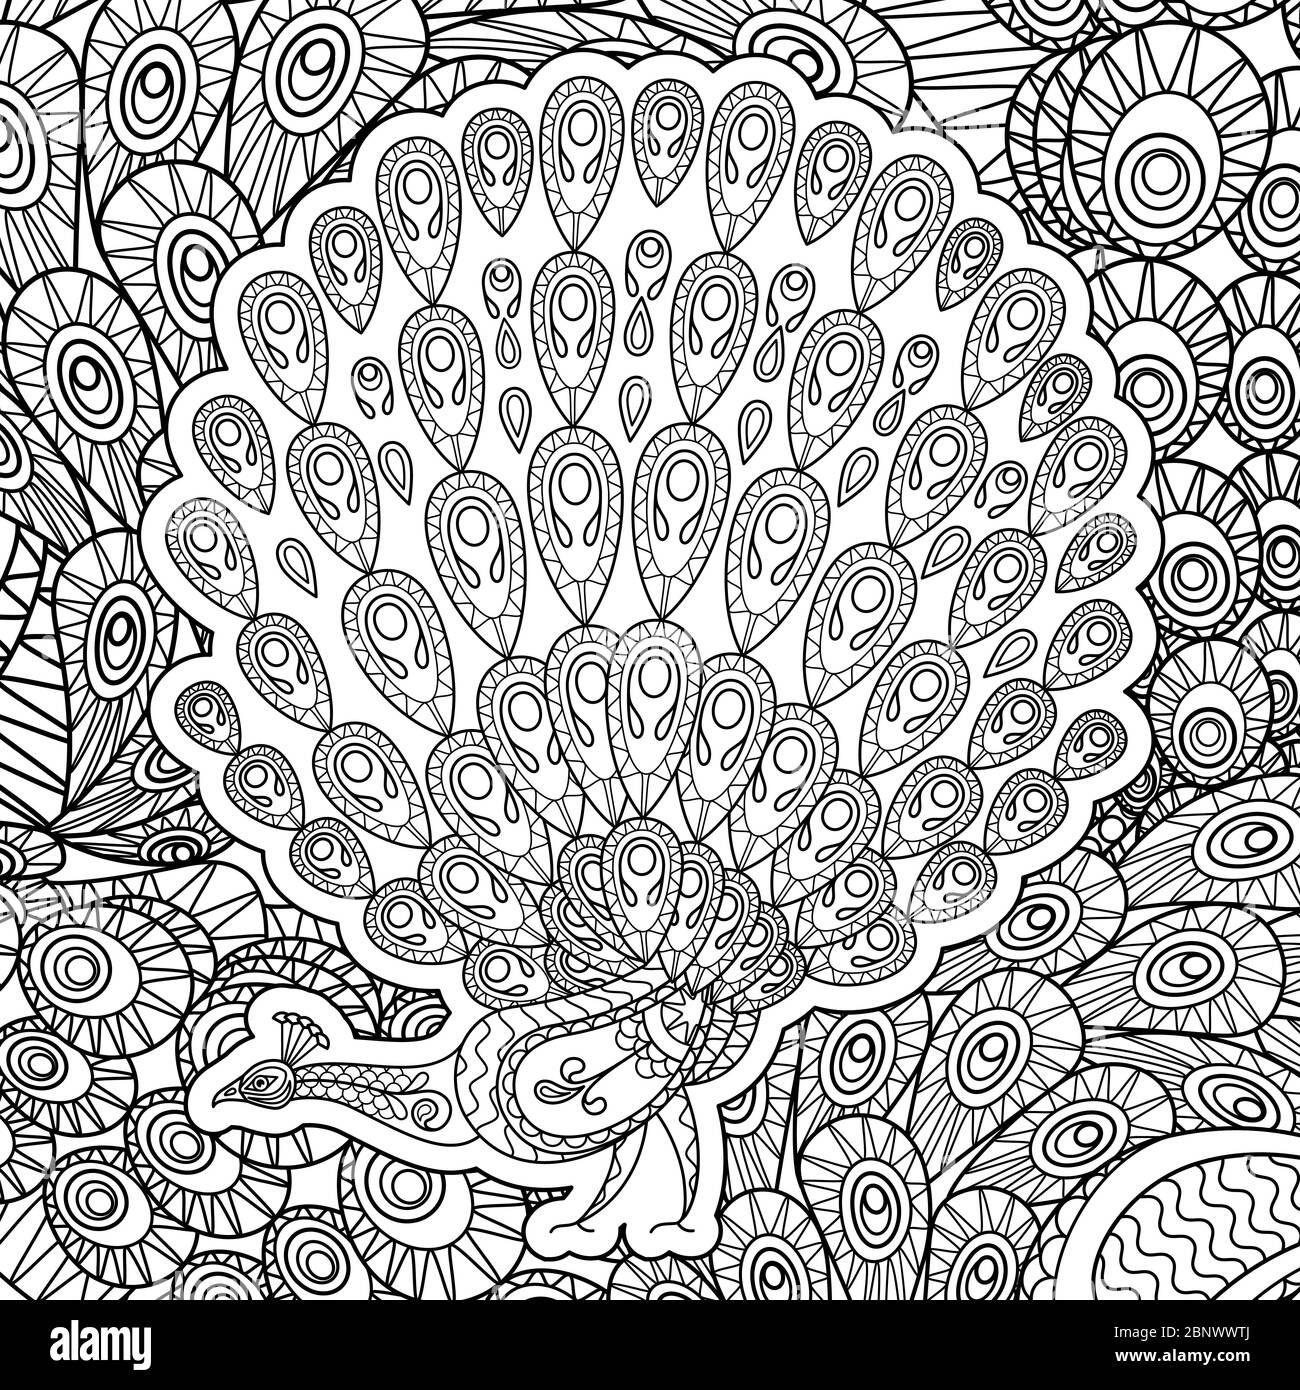 Coloring page for adults with Peacock vector illustration Stock Vector